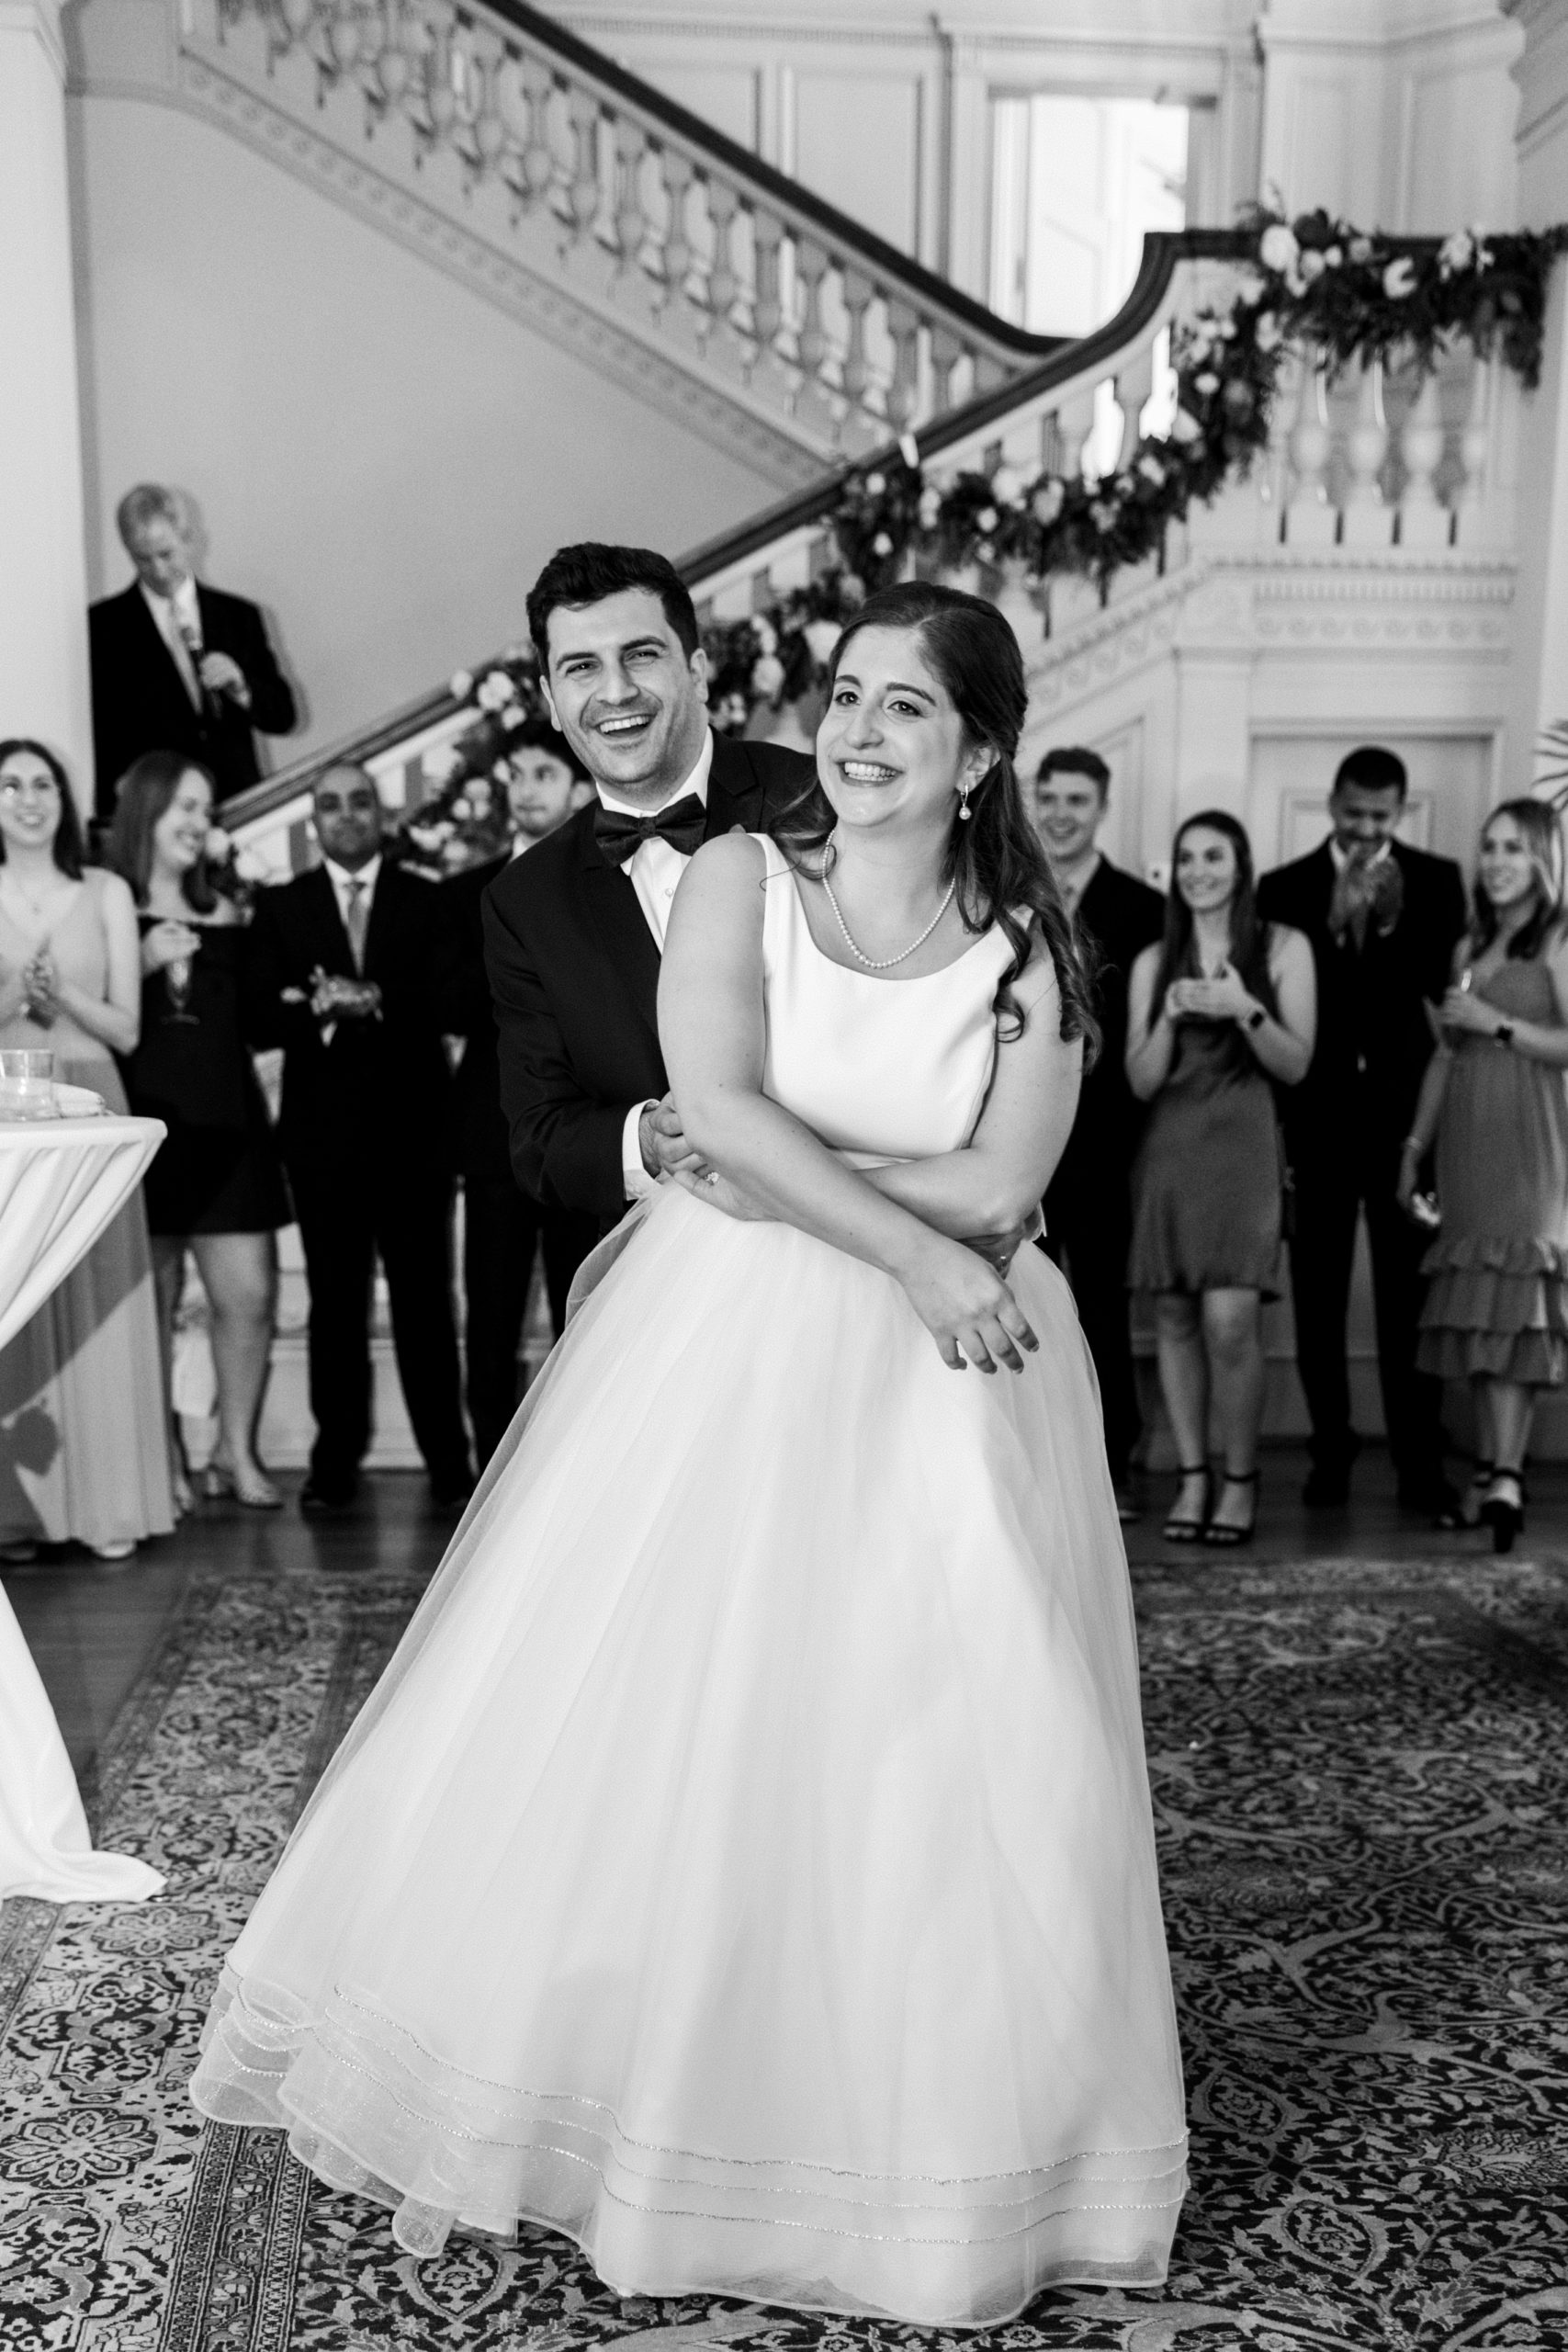 Groom embraces bride and they smile at wedding reception for Cairnwood Estate Wedding Photography